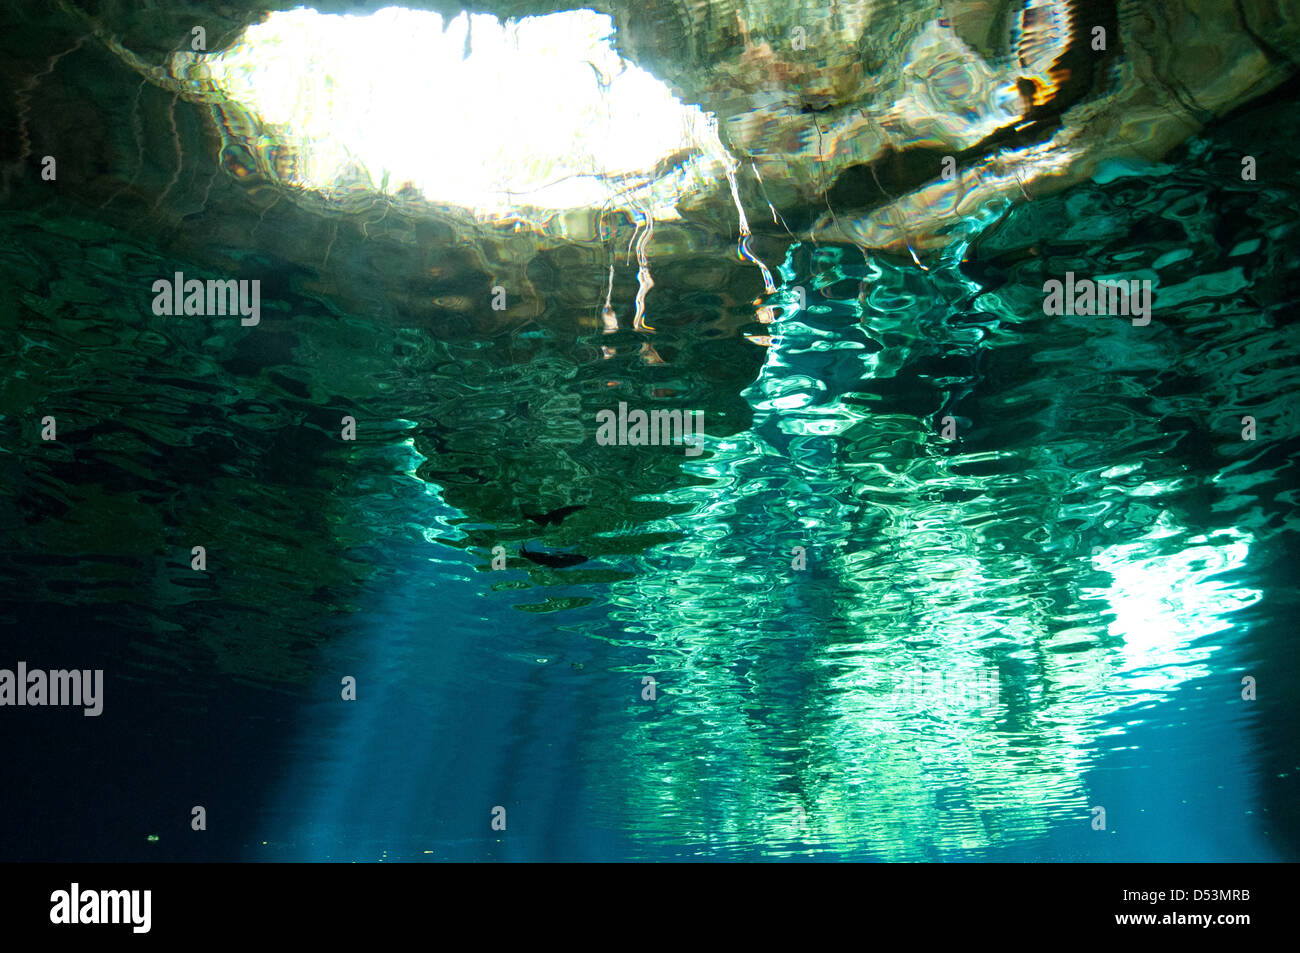 A Shot taken inside a cenote cave looking toward the light source. Stock Photo